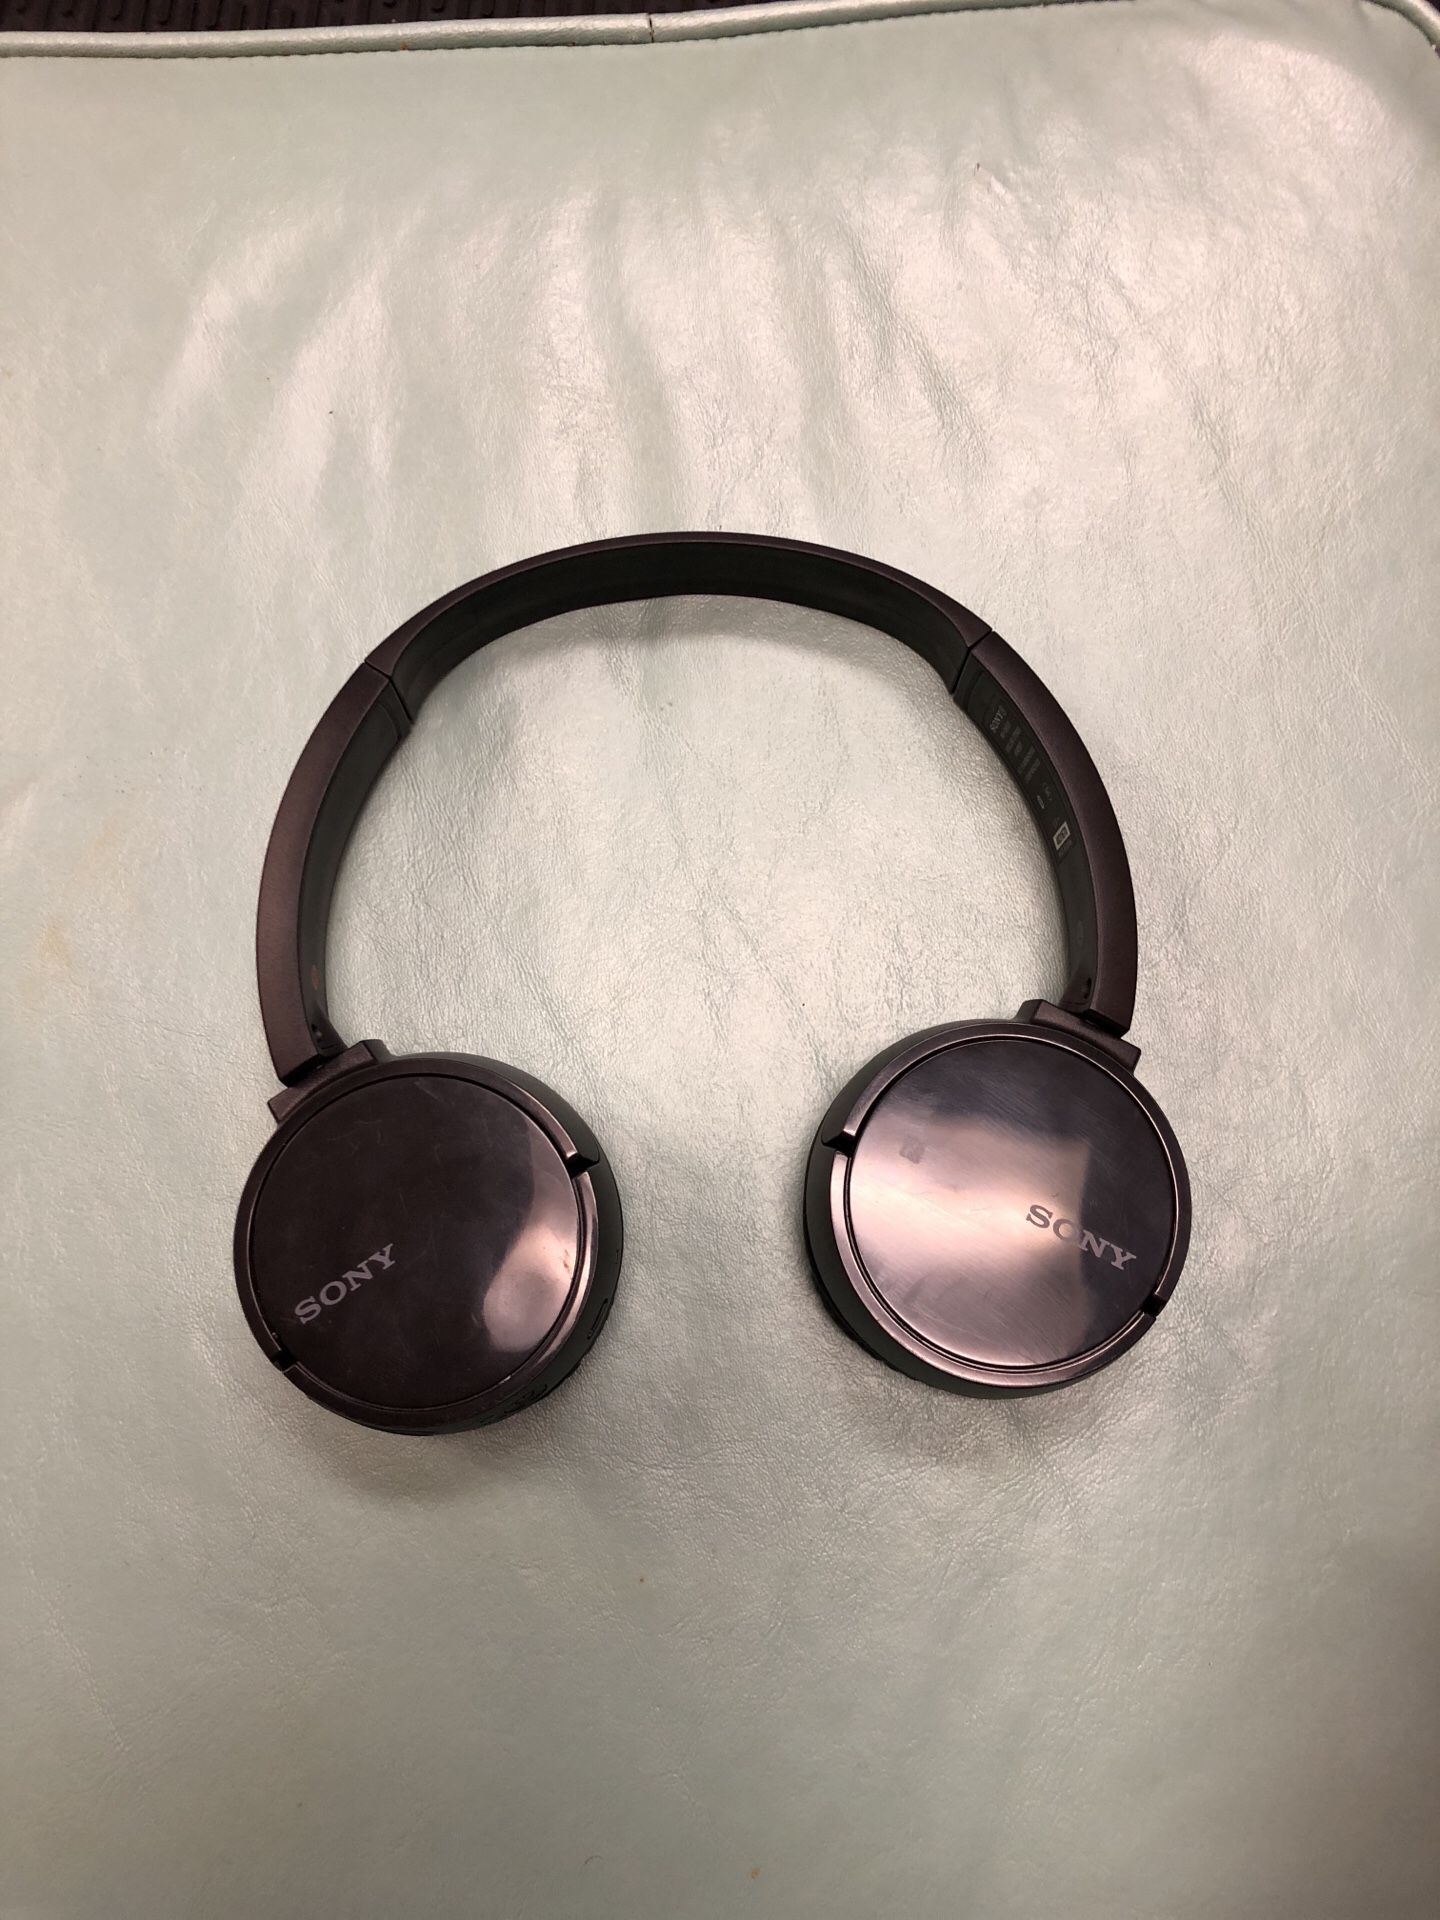 Don’t WH-CH500 wireless stereo headset